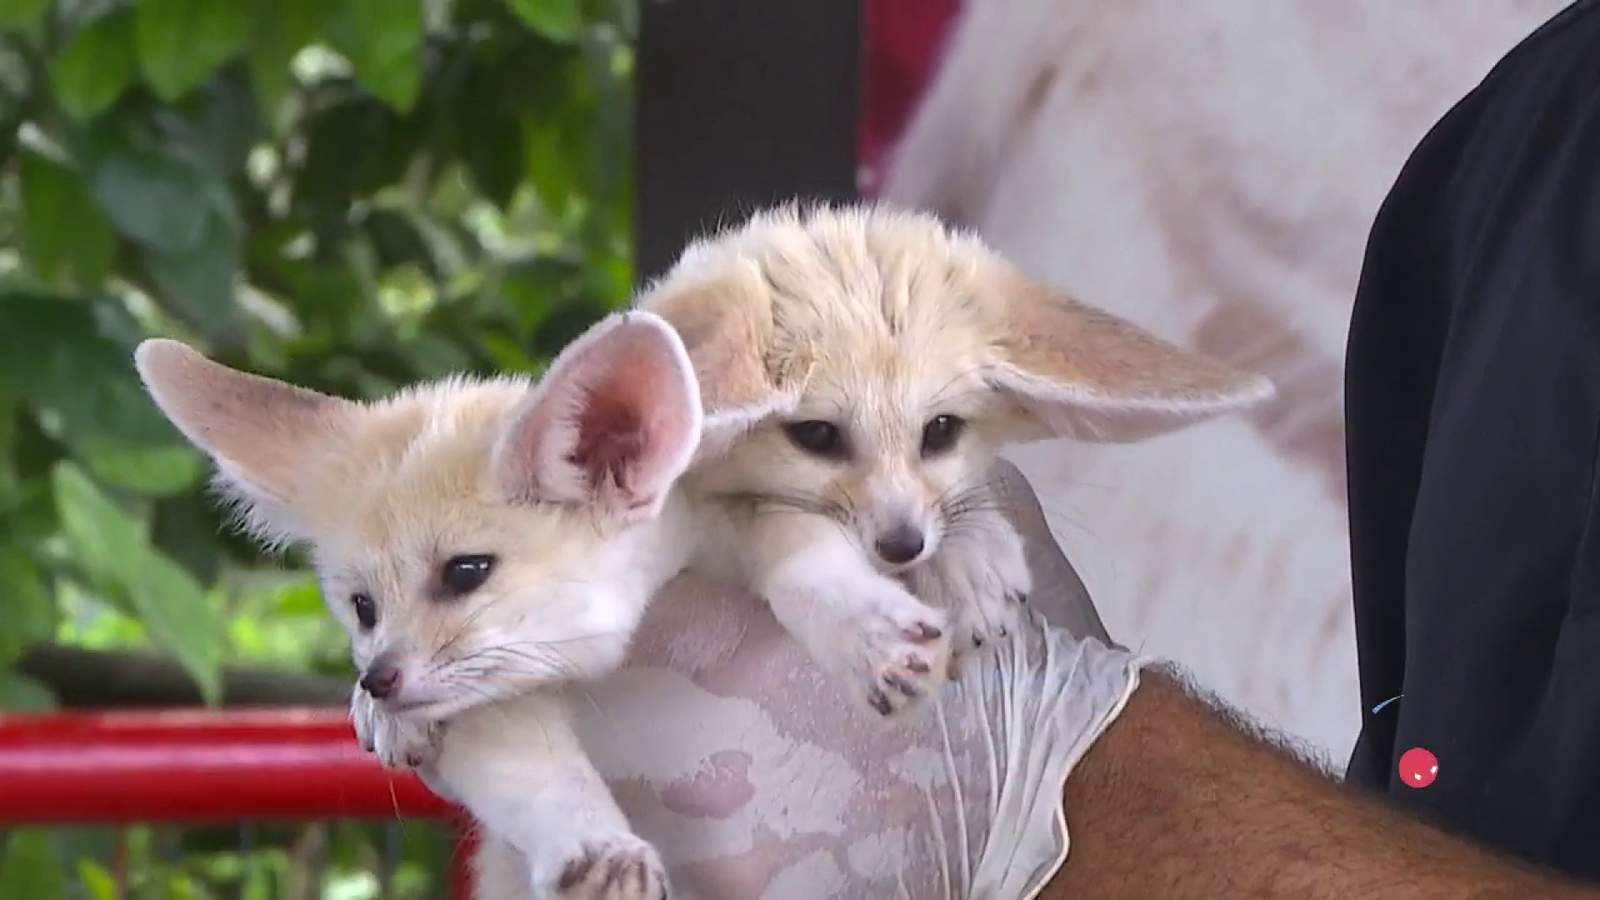 Where you can see the world’s smallest fox with the biggest ears!